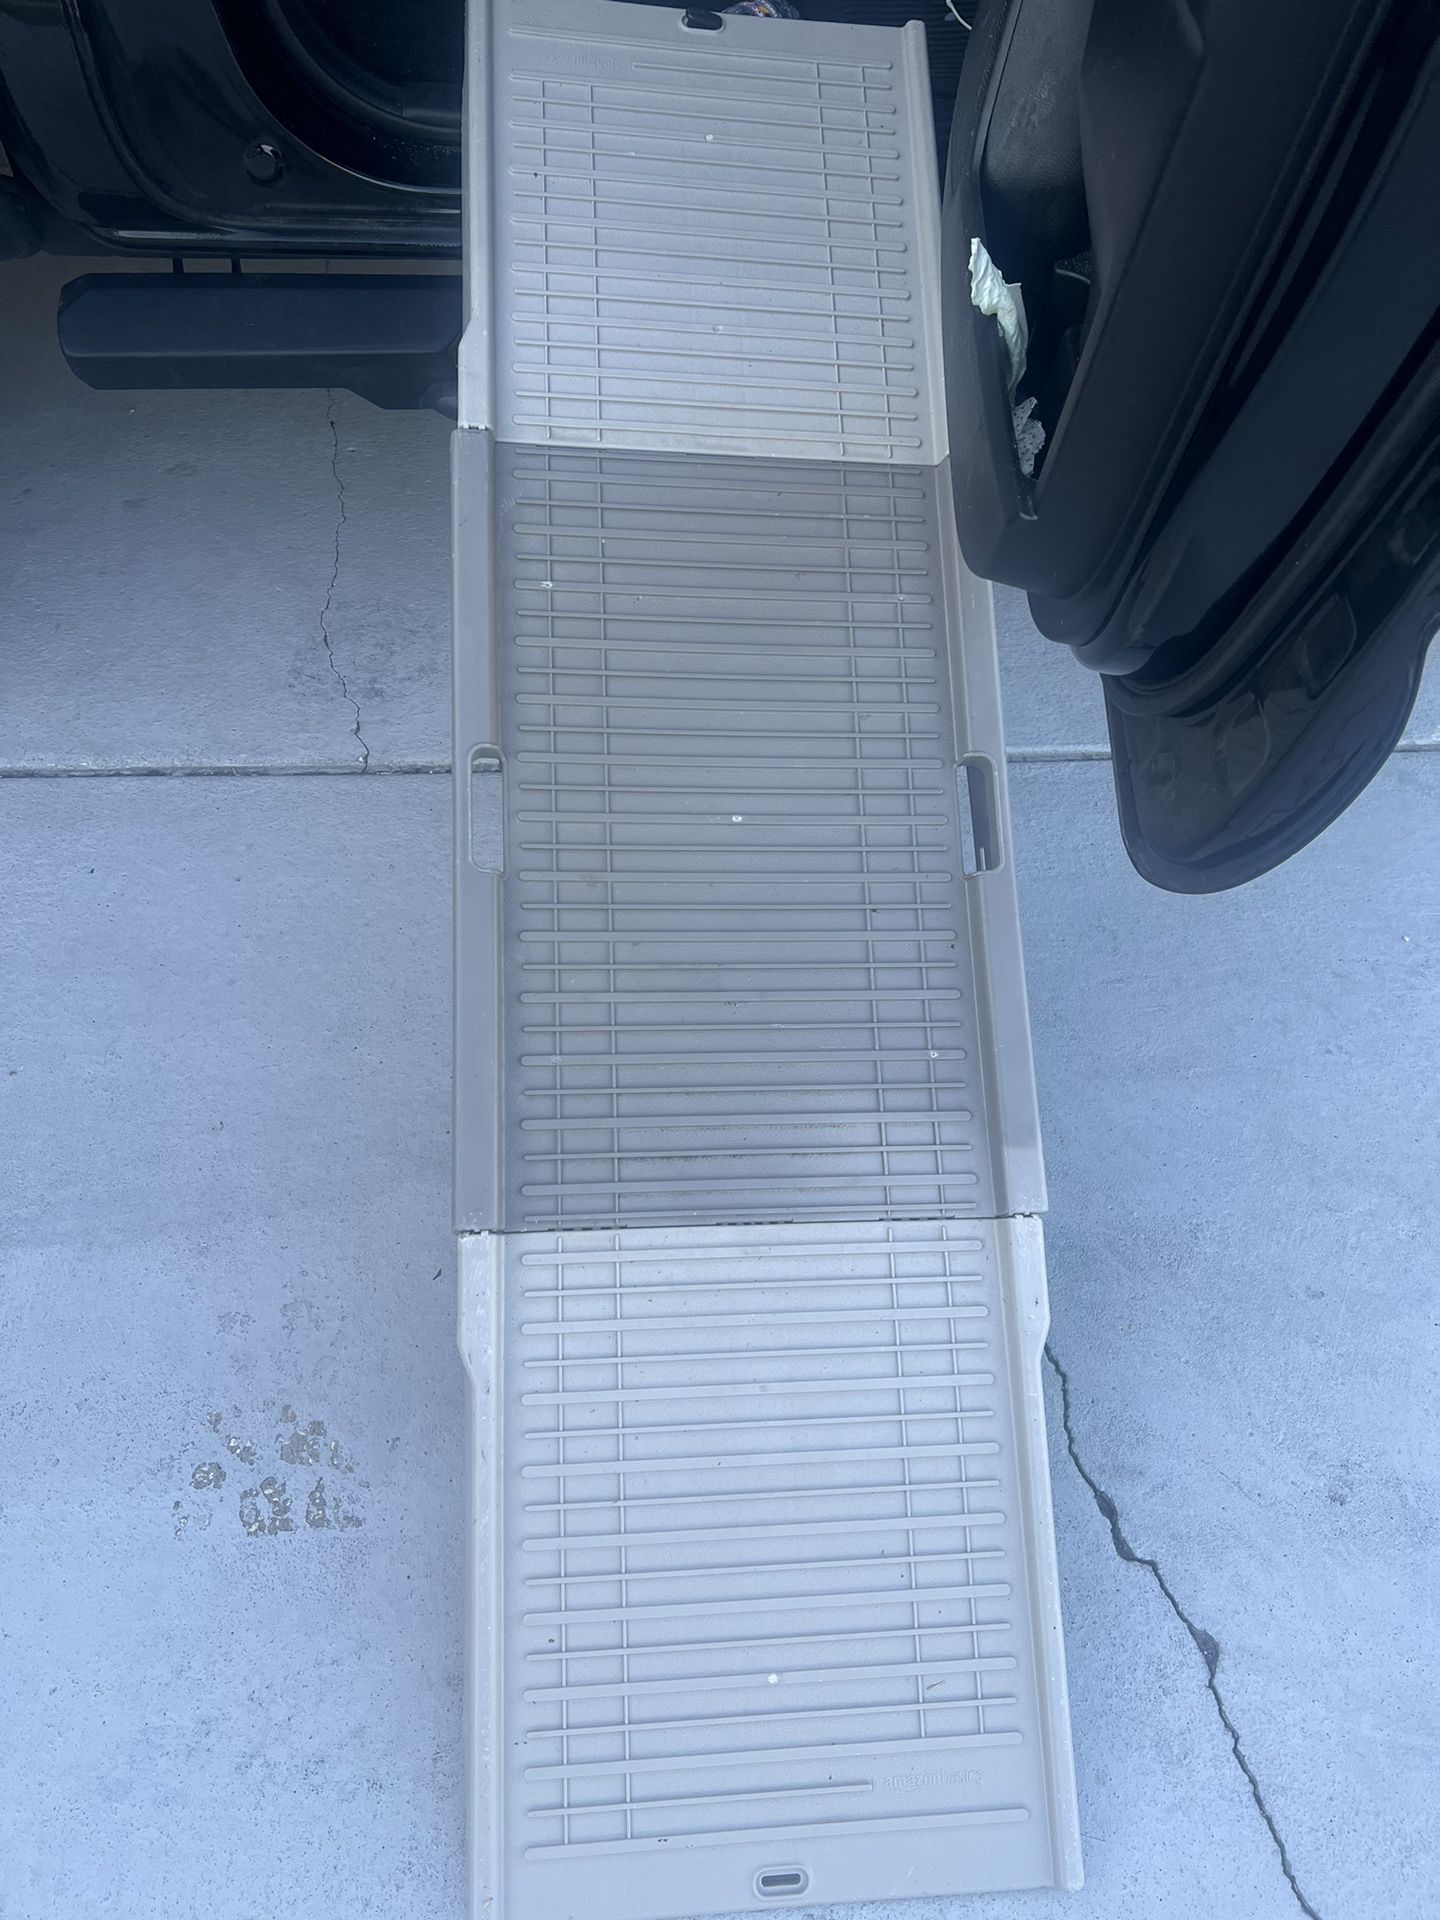 Amazon Basics Plastic Pet Ramp Universal for Car, Truck, or SUV, Tri-Fold, 63 in x 18.3 in x 3.9 in, Ivory lot#0.7APR1617 